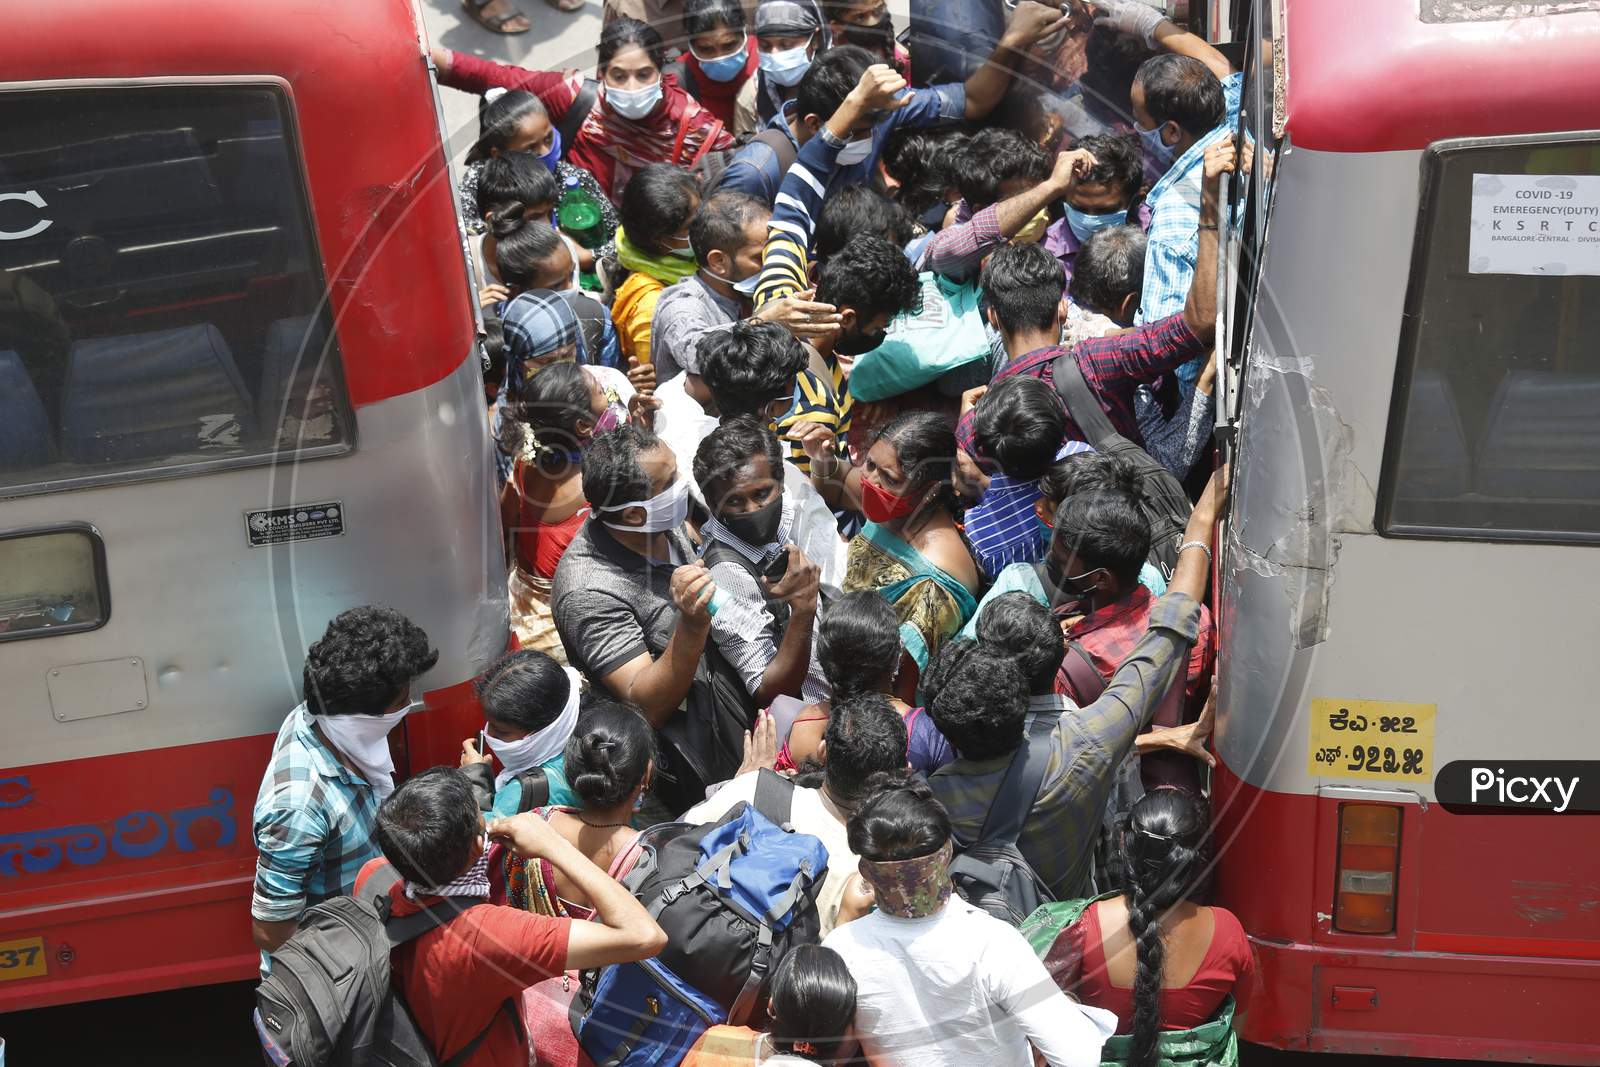 People attempt to board public transport buses during the nationwide lockdown to stop the spread of Coronavirus (COVID-19) in Bangalore, India, May 03, 2020.